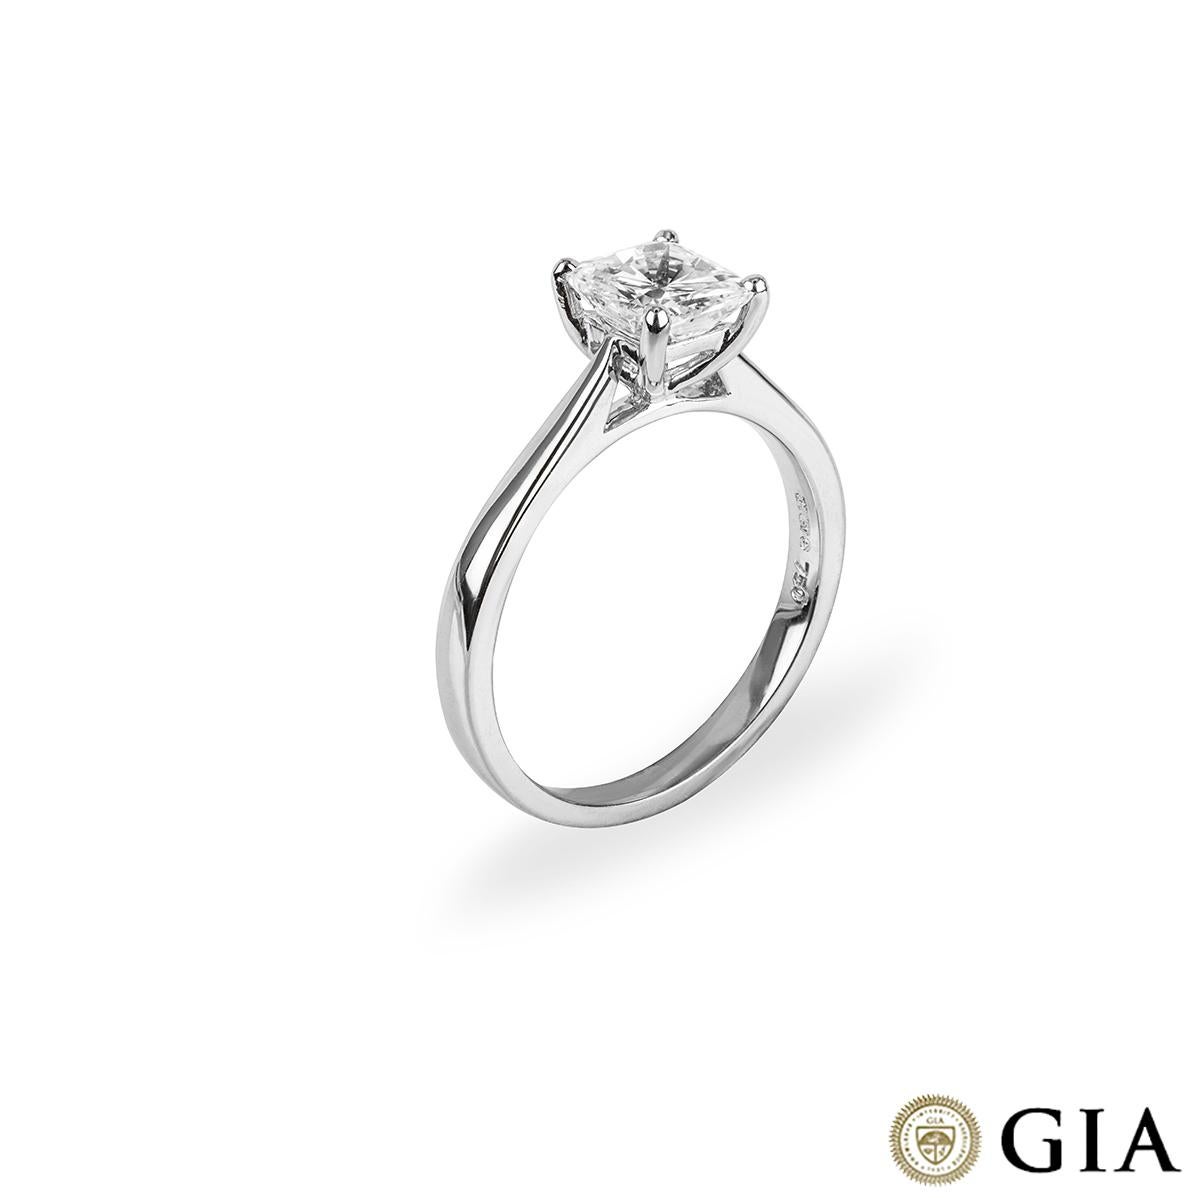 A stunning 18k white gold diamond engagement ring. The solitaire comprises of a cushion cut diamond in a four claw setting with a weight of 1.14ct, G in colour and VS1 clarity. The ring has a gross weight of 3.40 grams and is currently a UK size M½